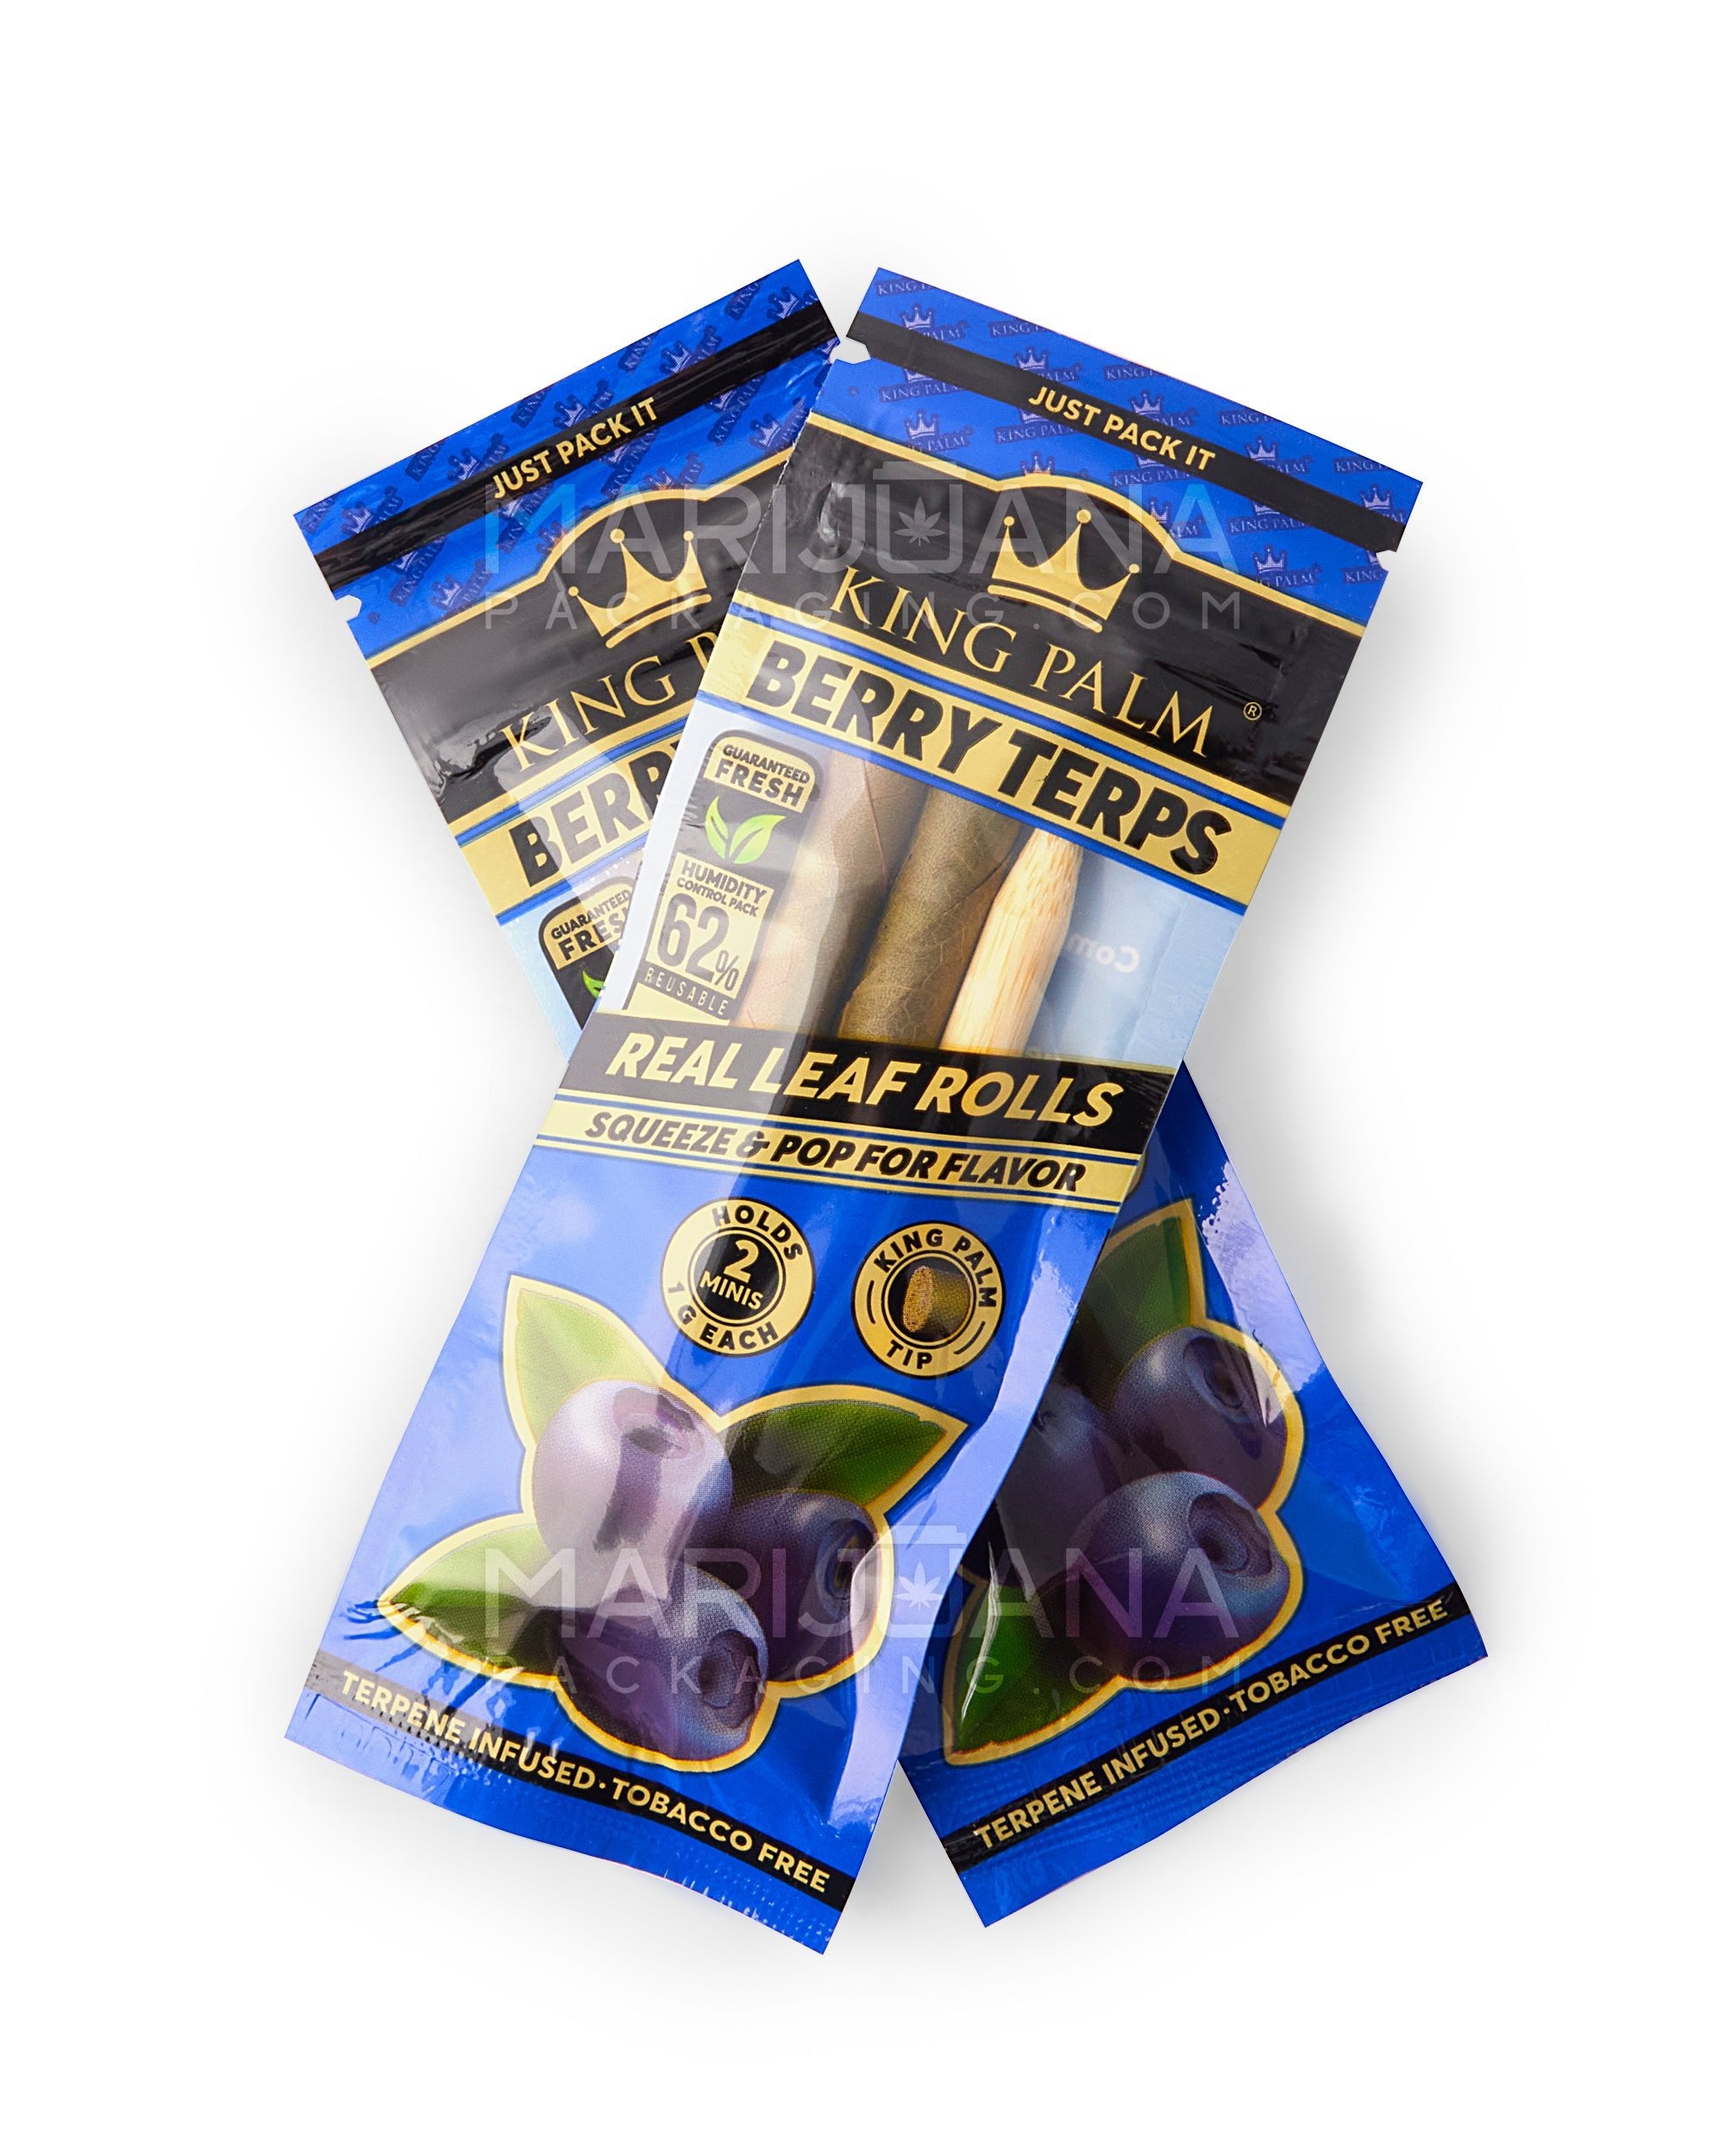 KING PALM | 'Retail Display' Natural Leaf Mini Rolls Blunt Wraps | 85mm - Berry Terps - 20 Count - 4